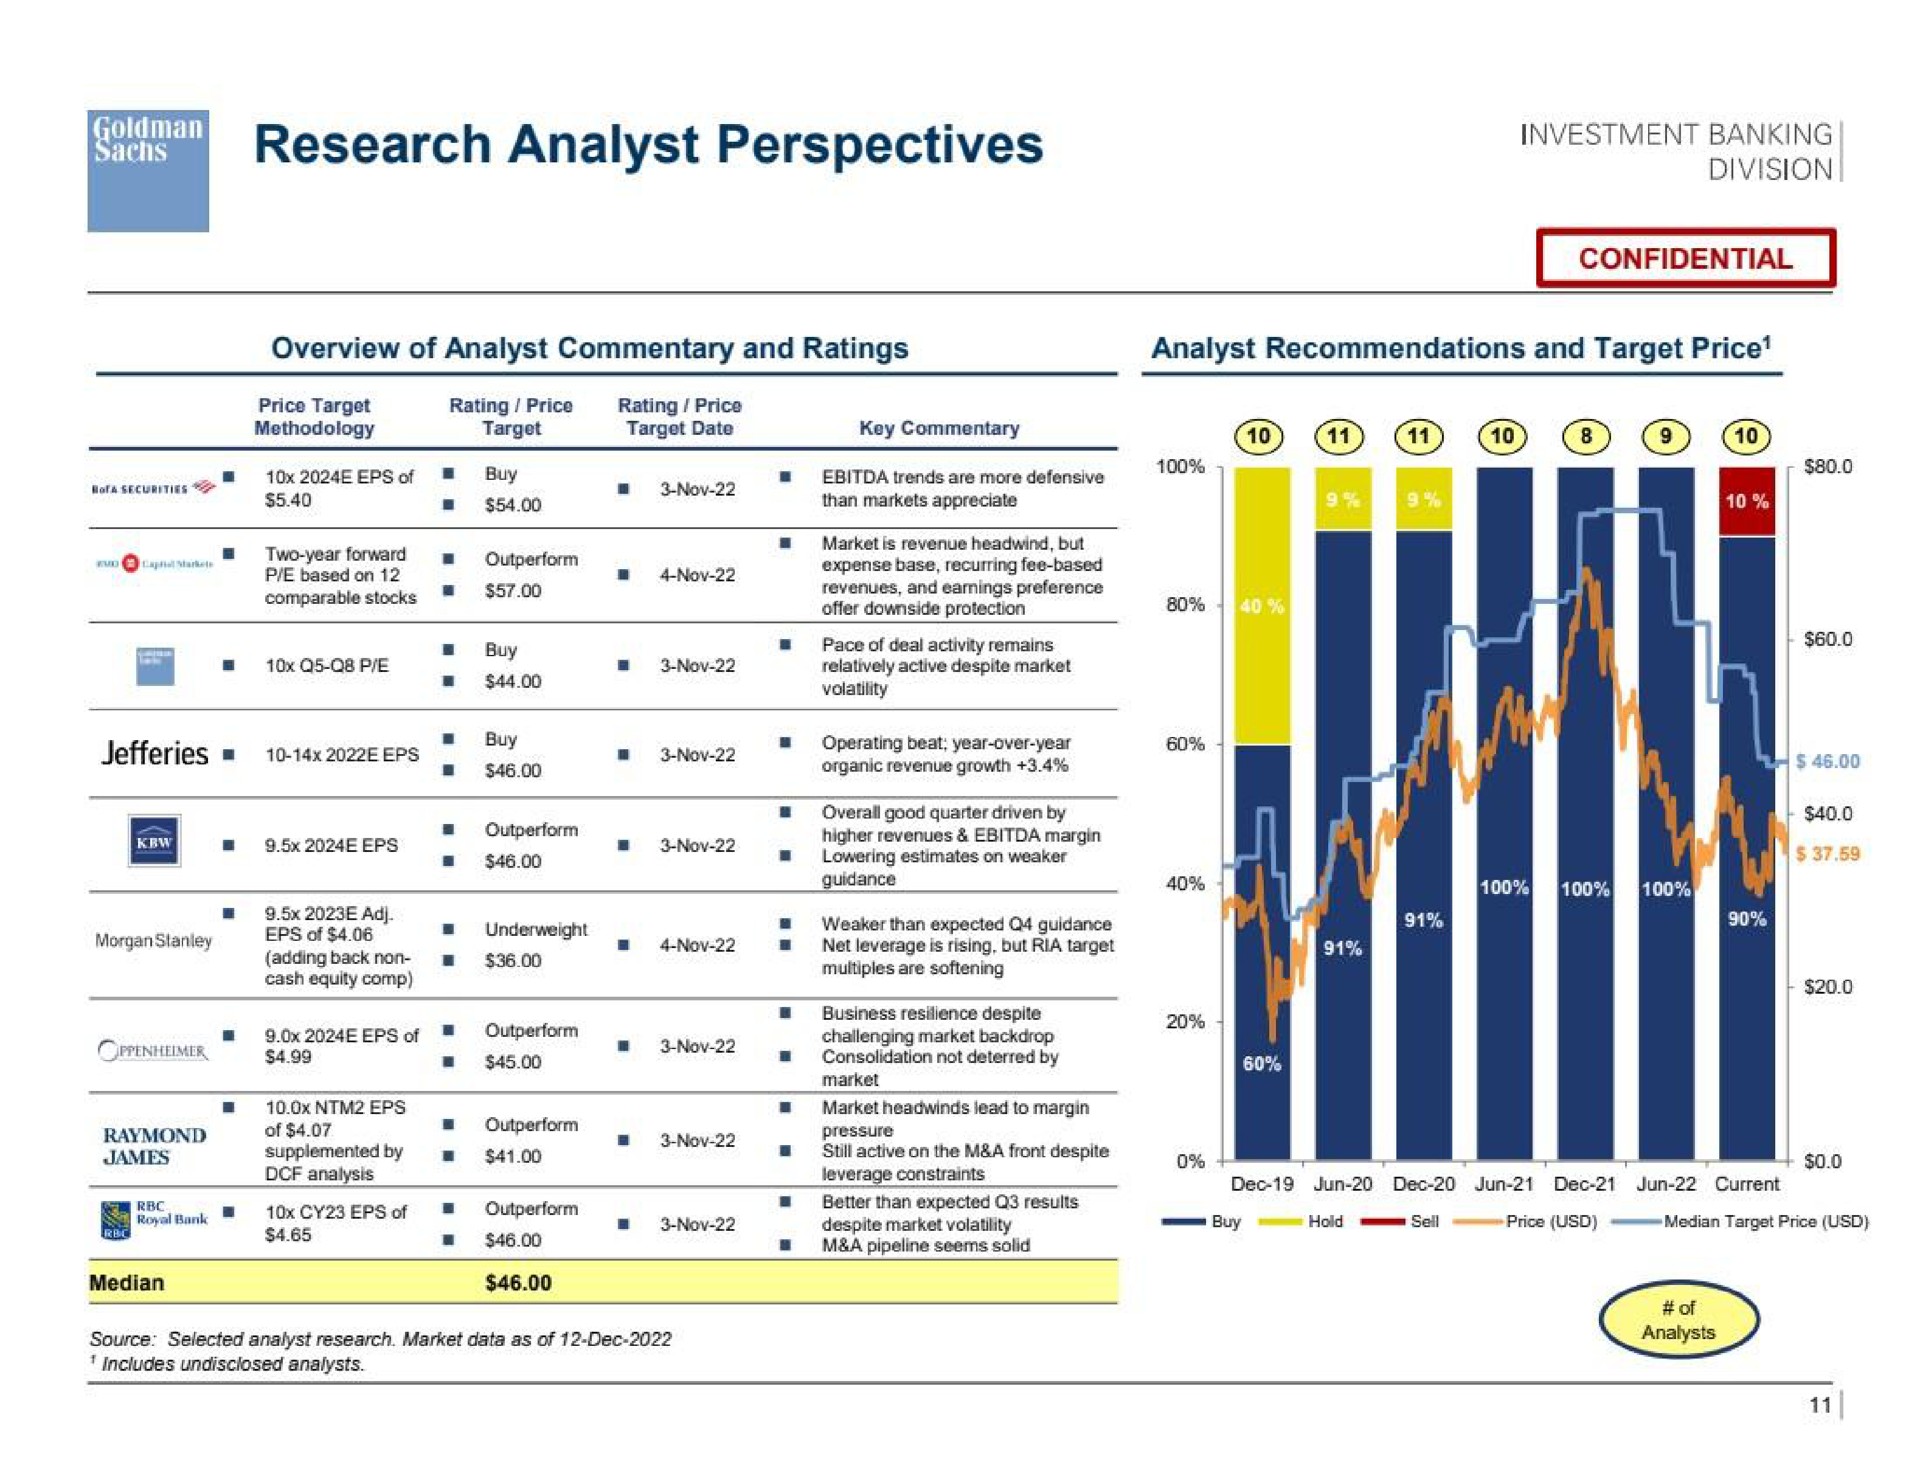 research analyst perspectives end names | Goldman Sachs